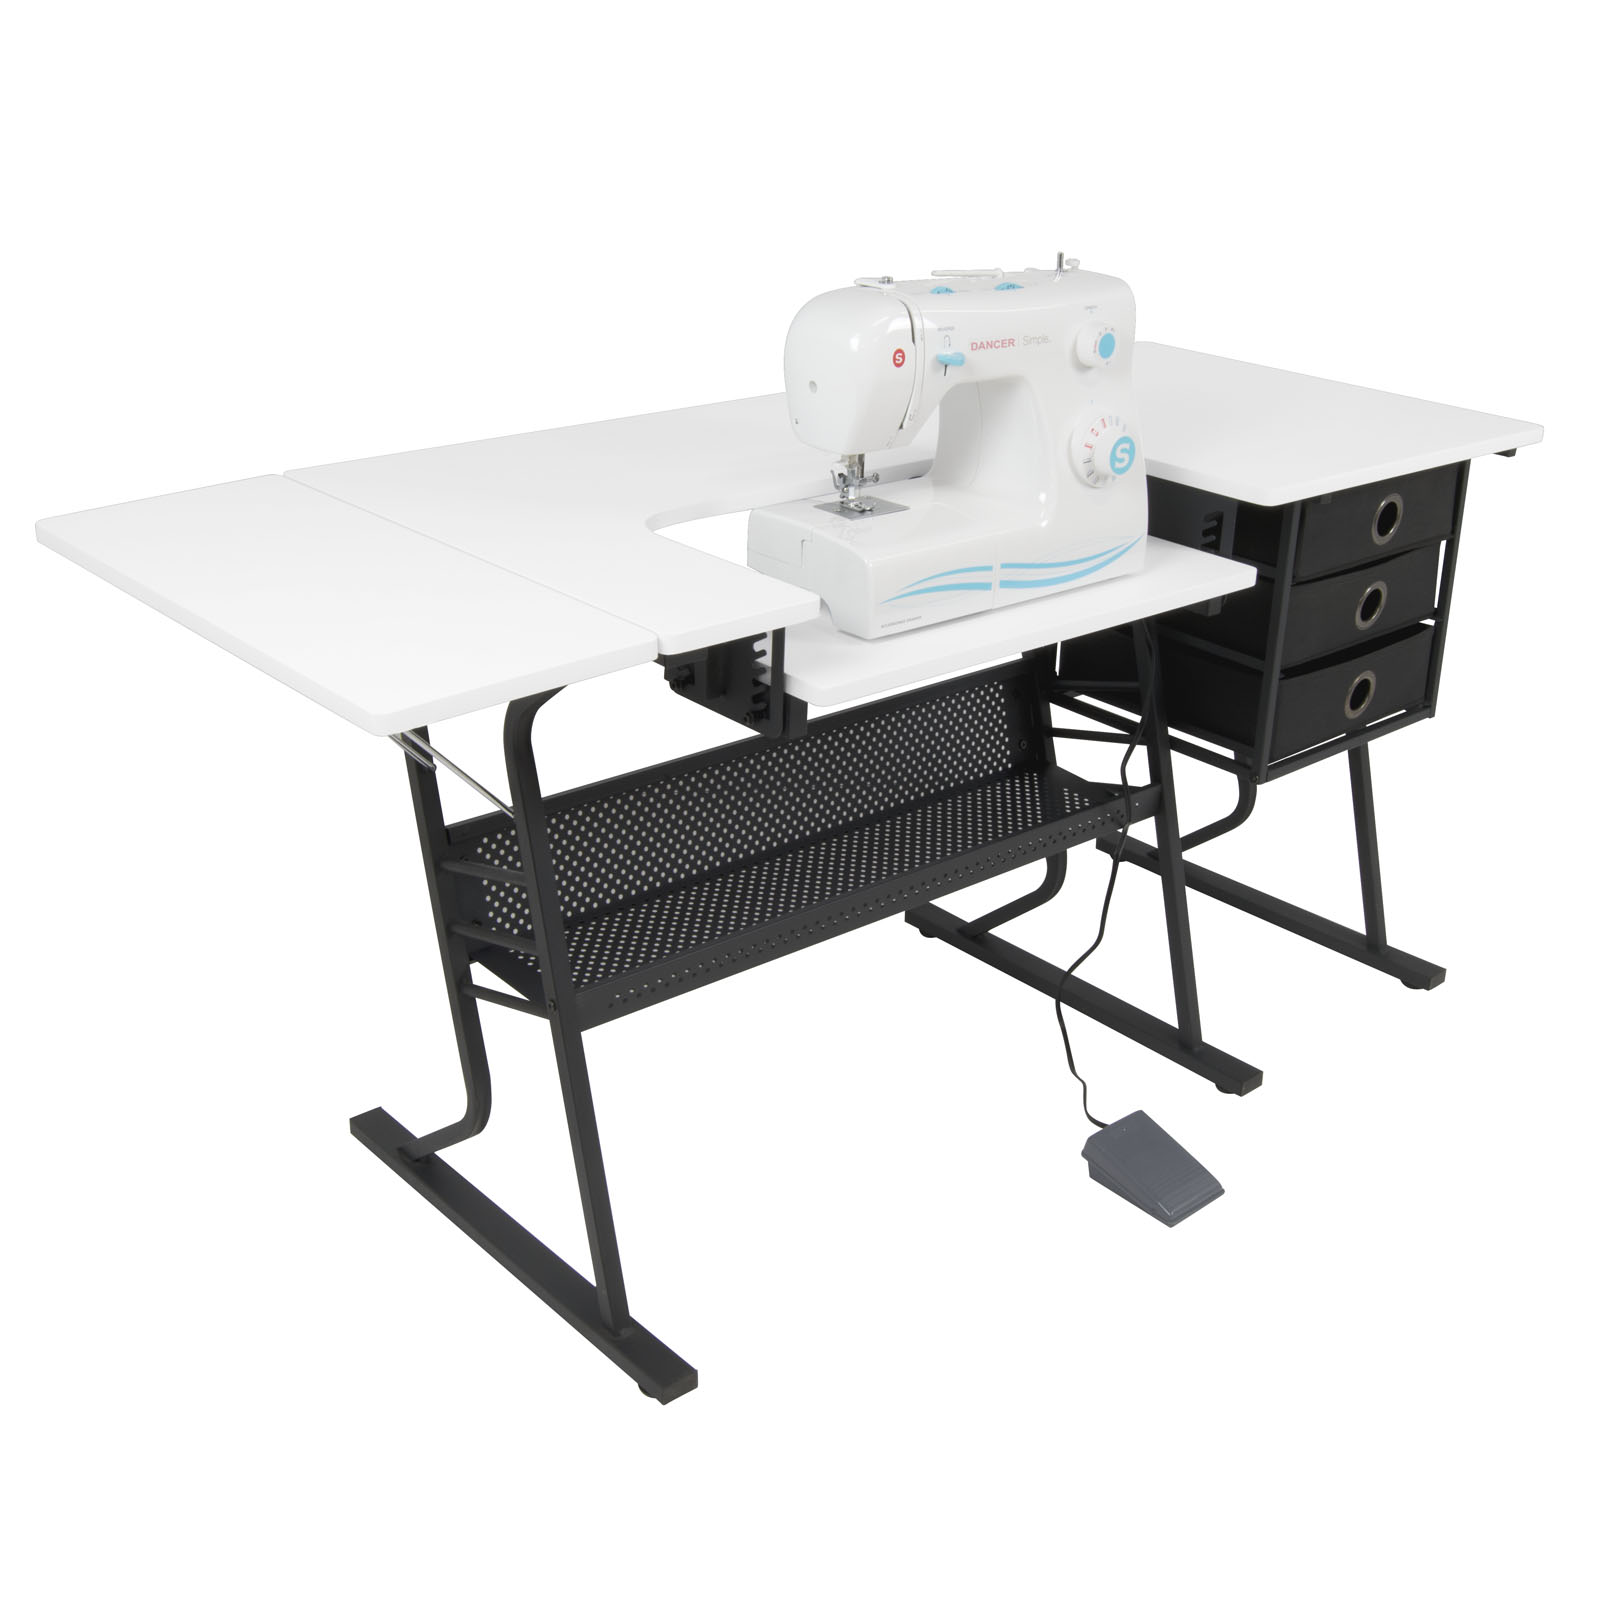 Eclipse Hobby Sewing Machine Table In Black White Item